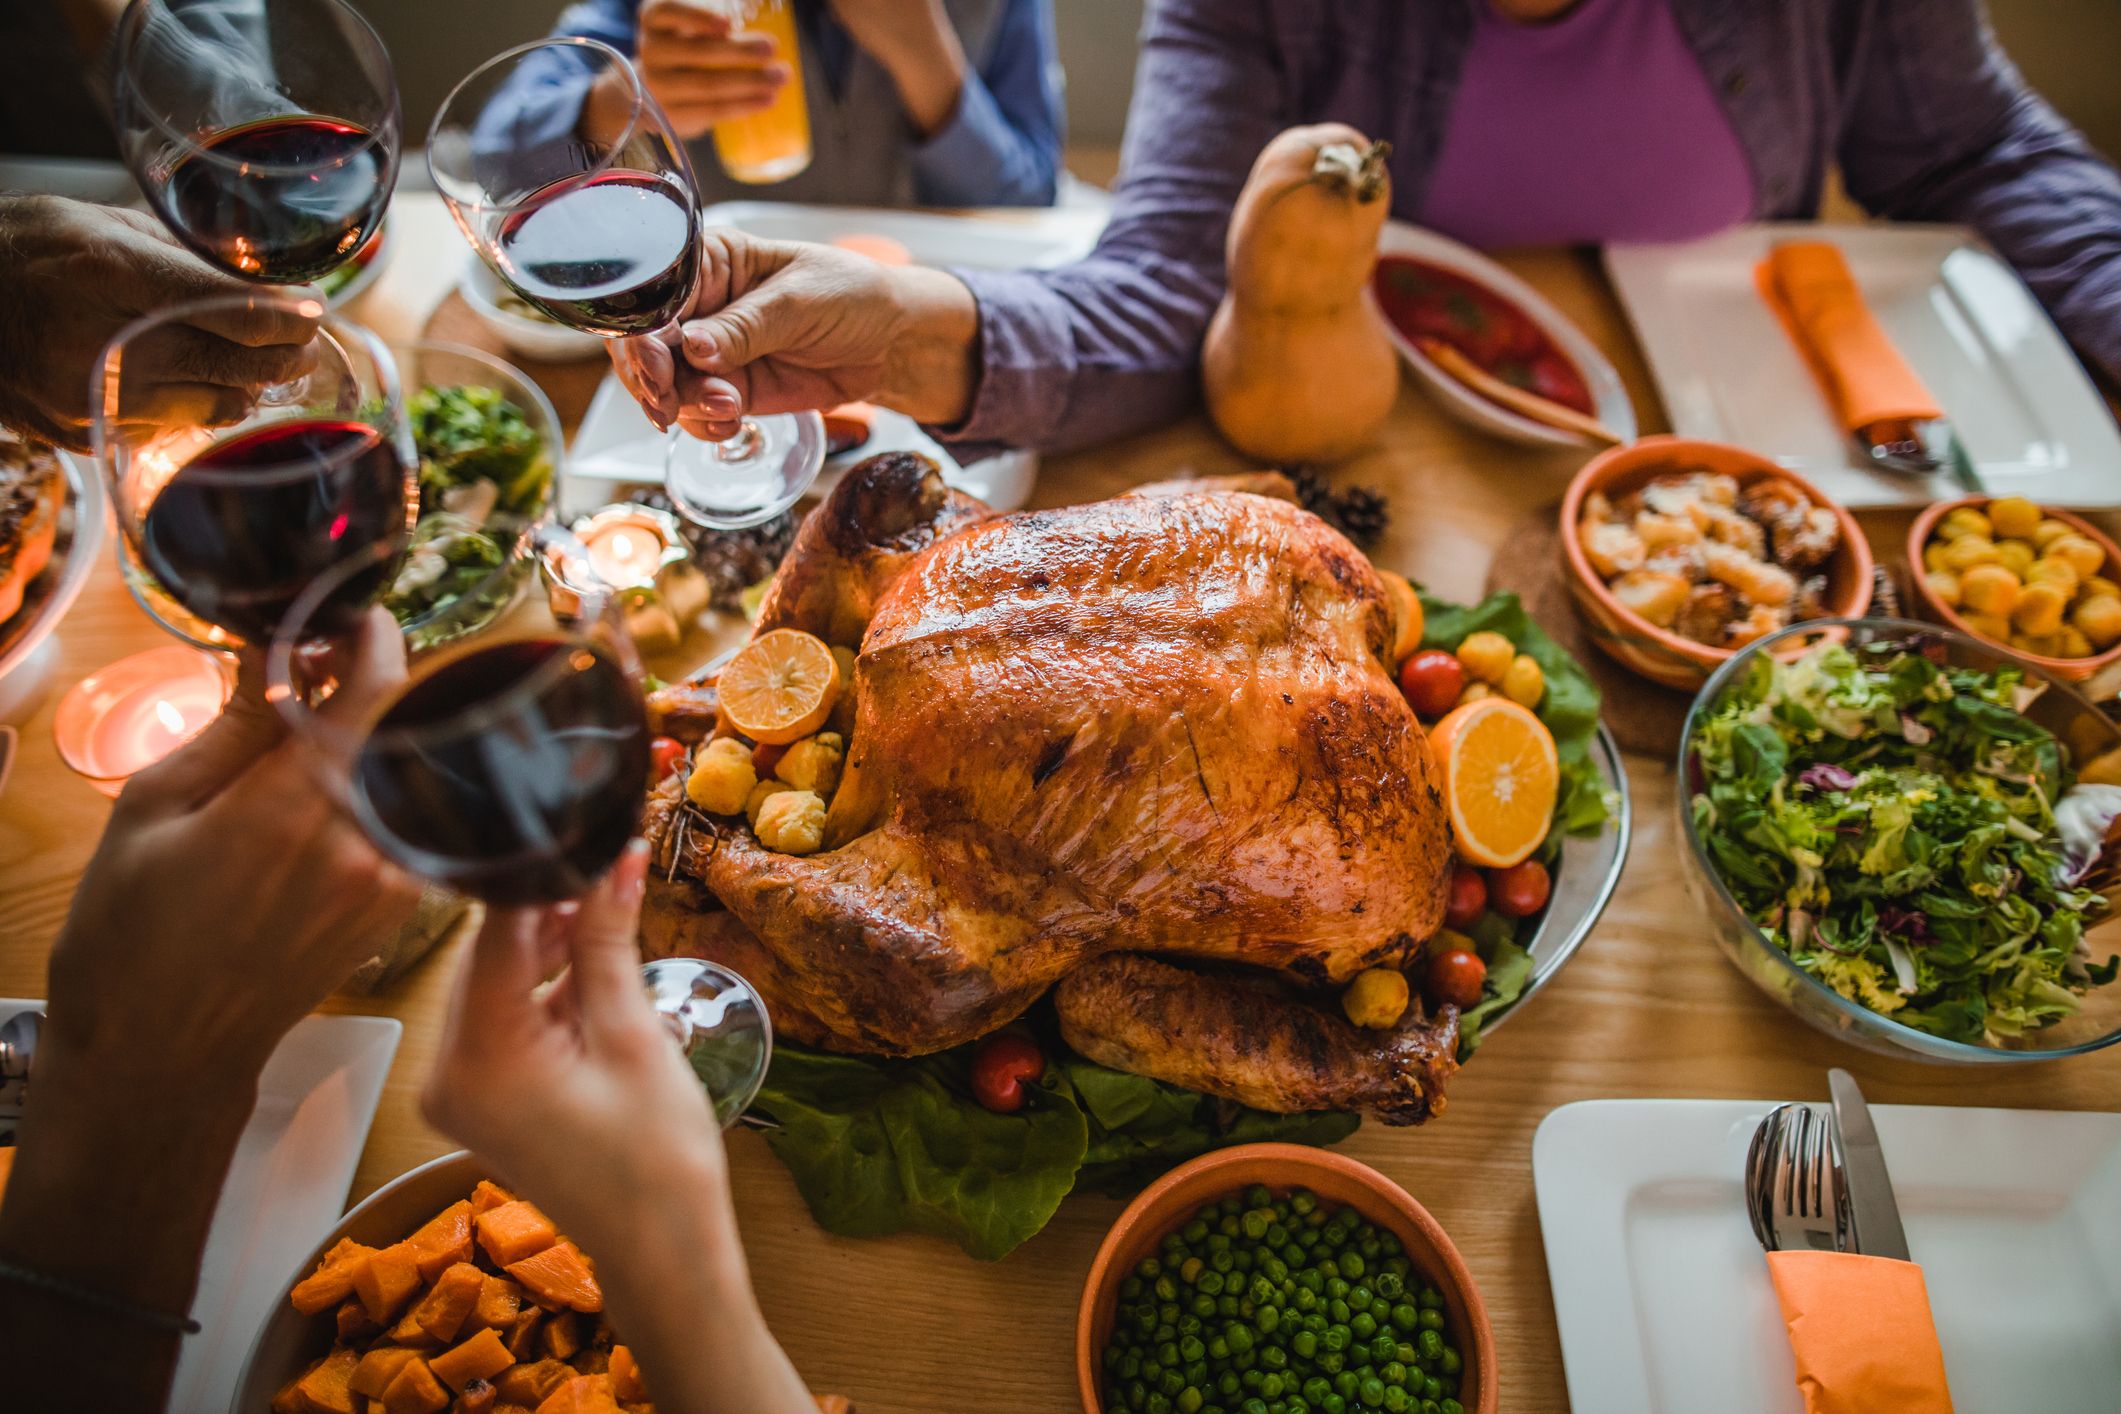 How To Safely Celebrate Thanksgiving During a Pandemic